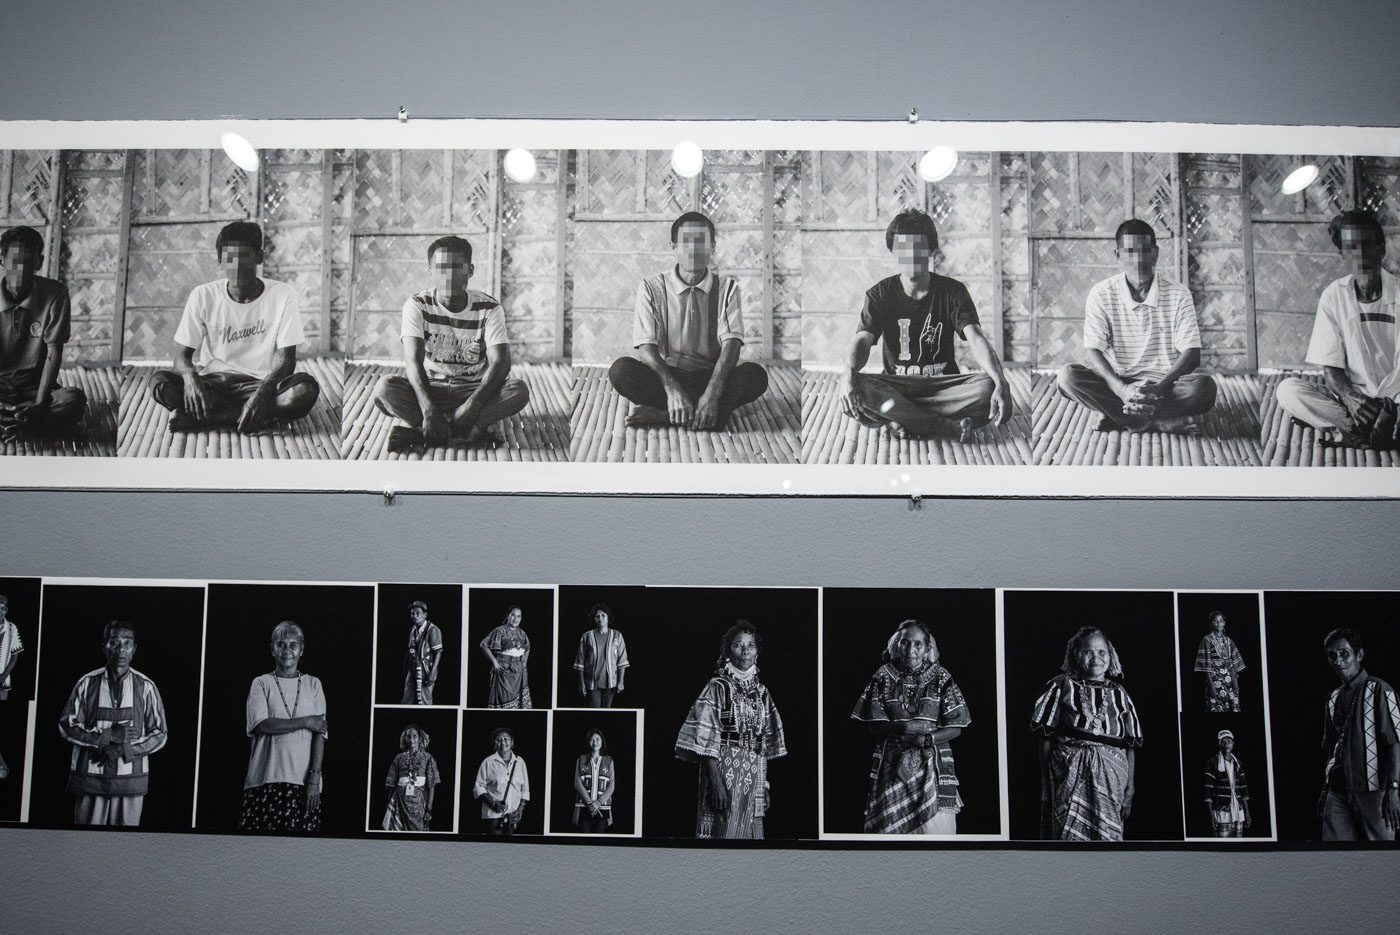 BLACK AND WHITE. The photographer favors black-and-white images in his portraits of indigenous people. Photo by Alecs Ongcal/Rappler 